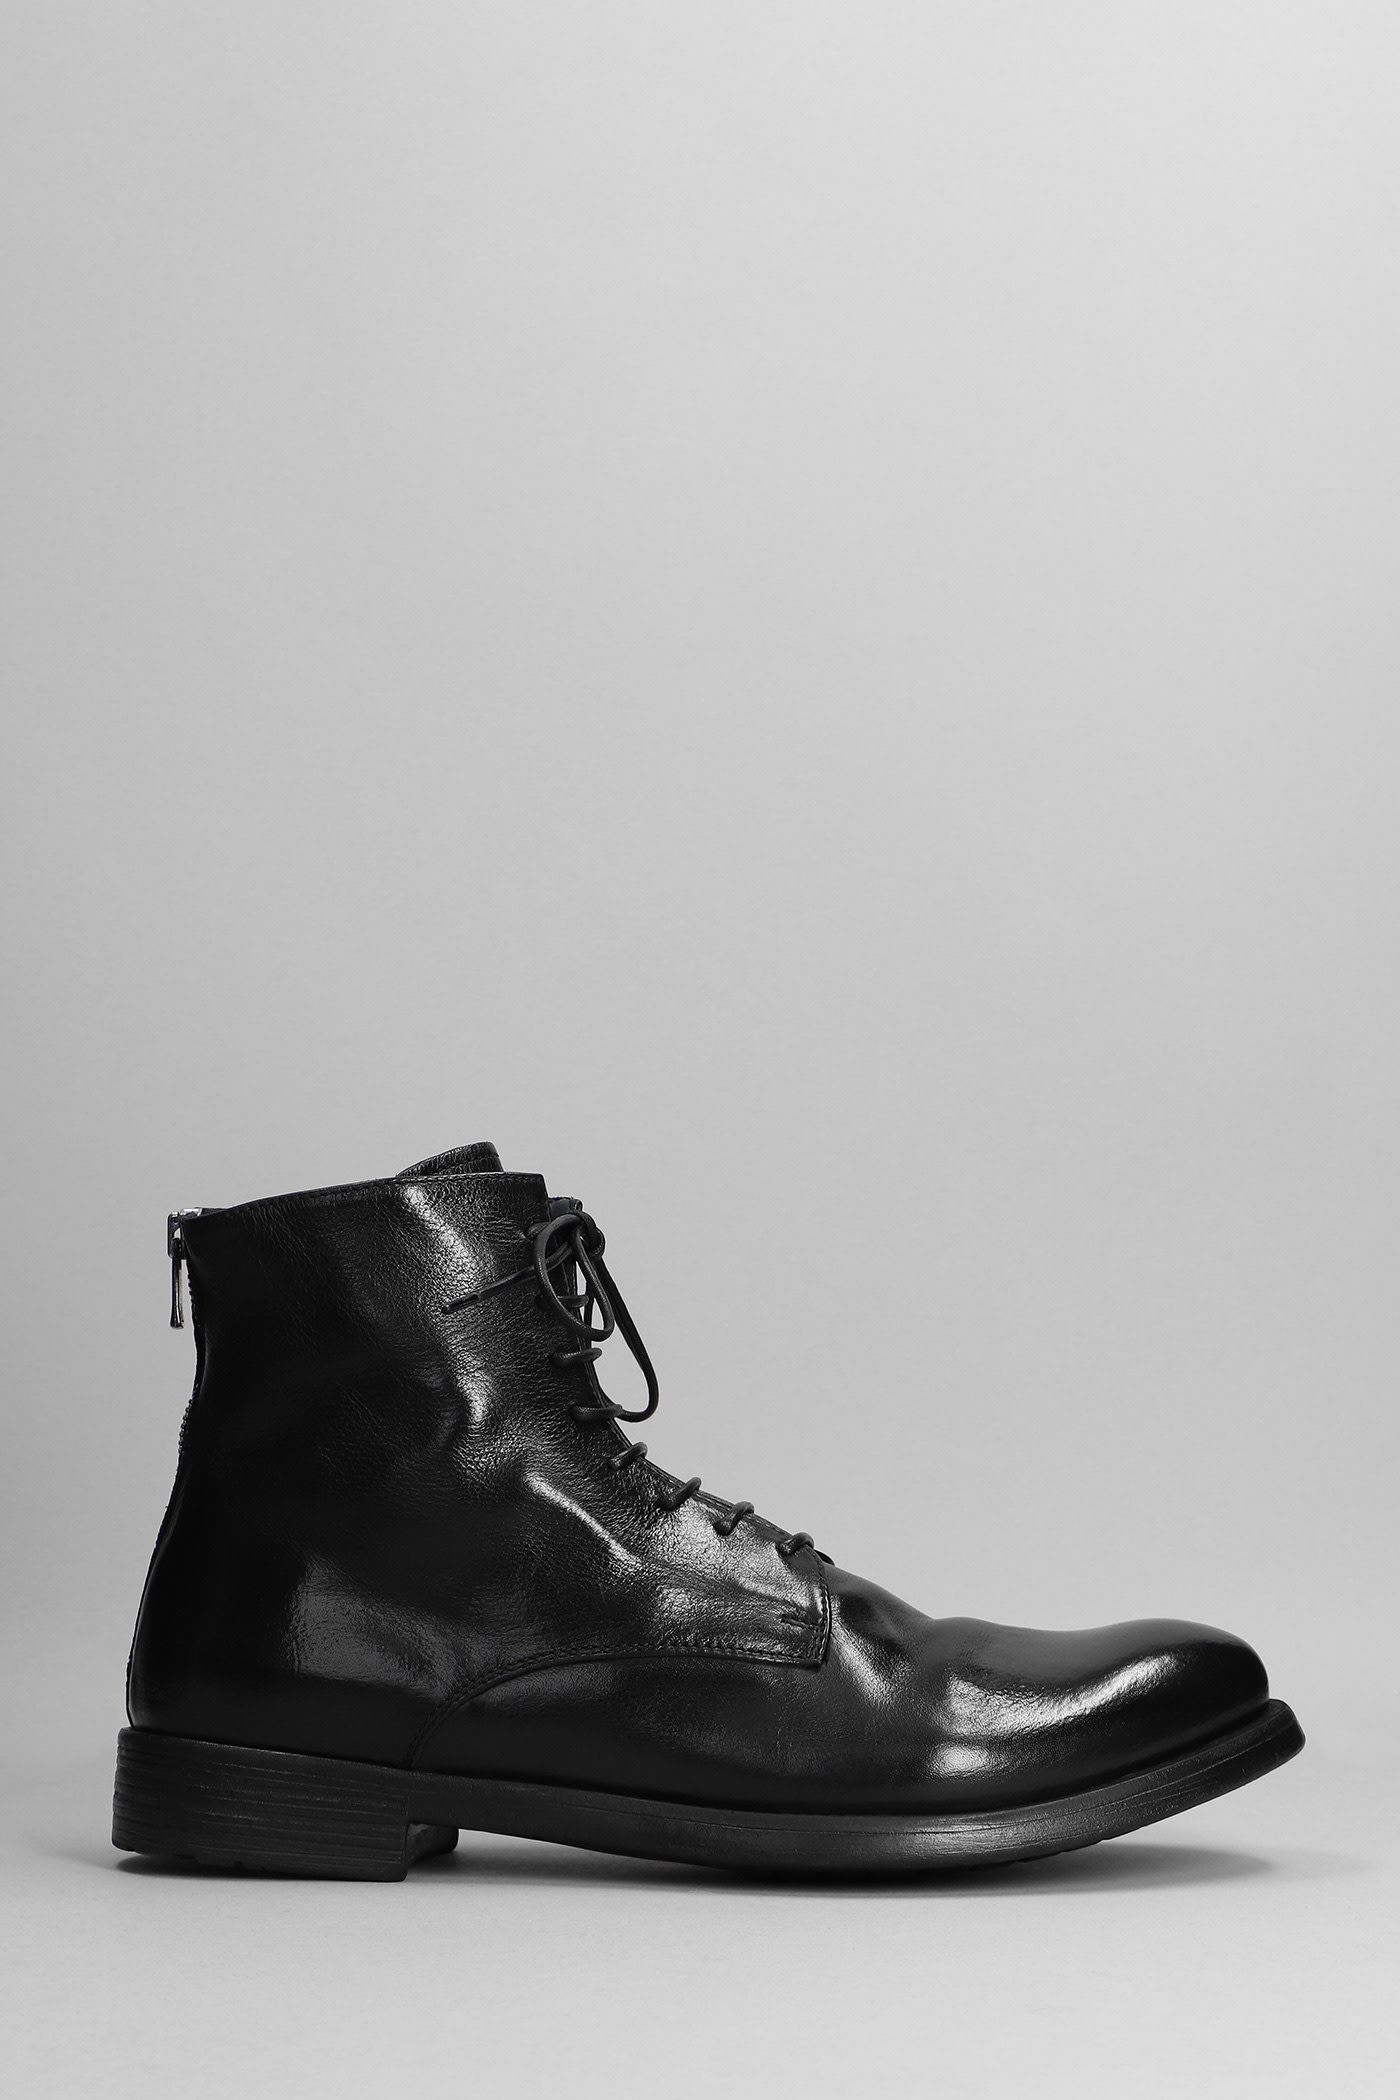 Officine Creative Hive 016 Combat Boots In Black Leather